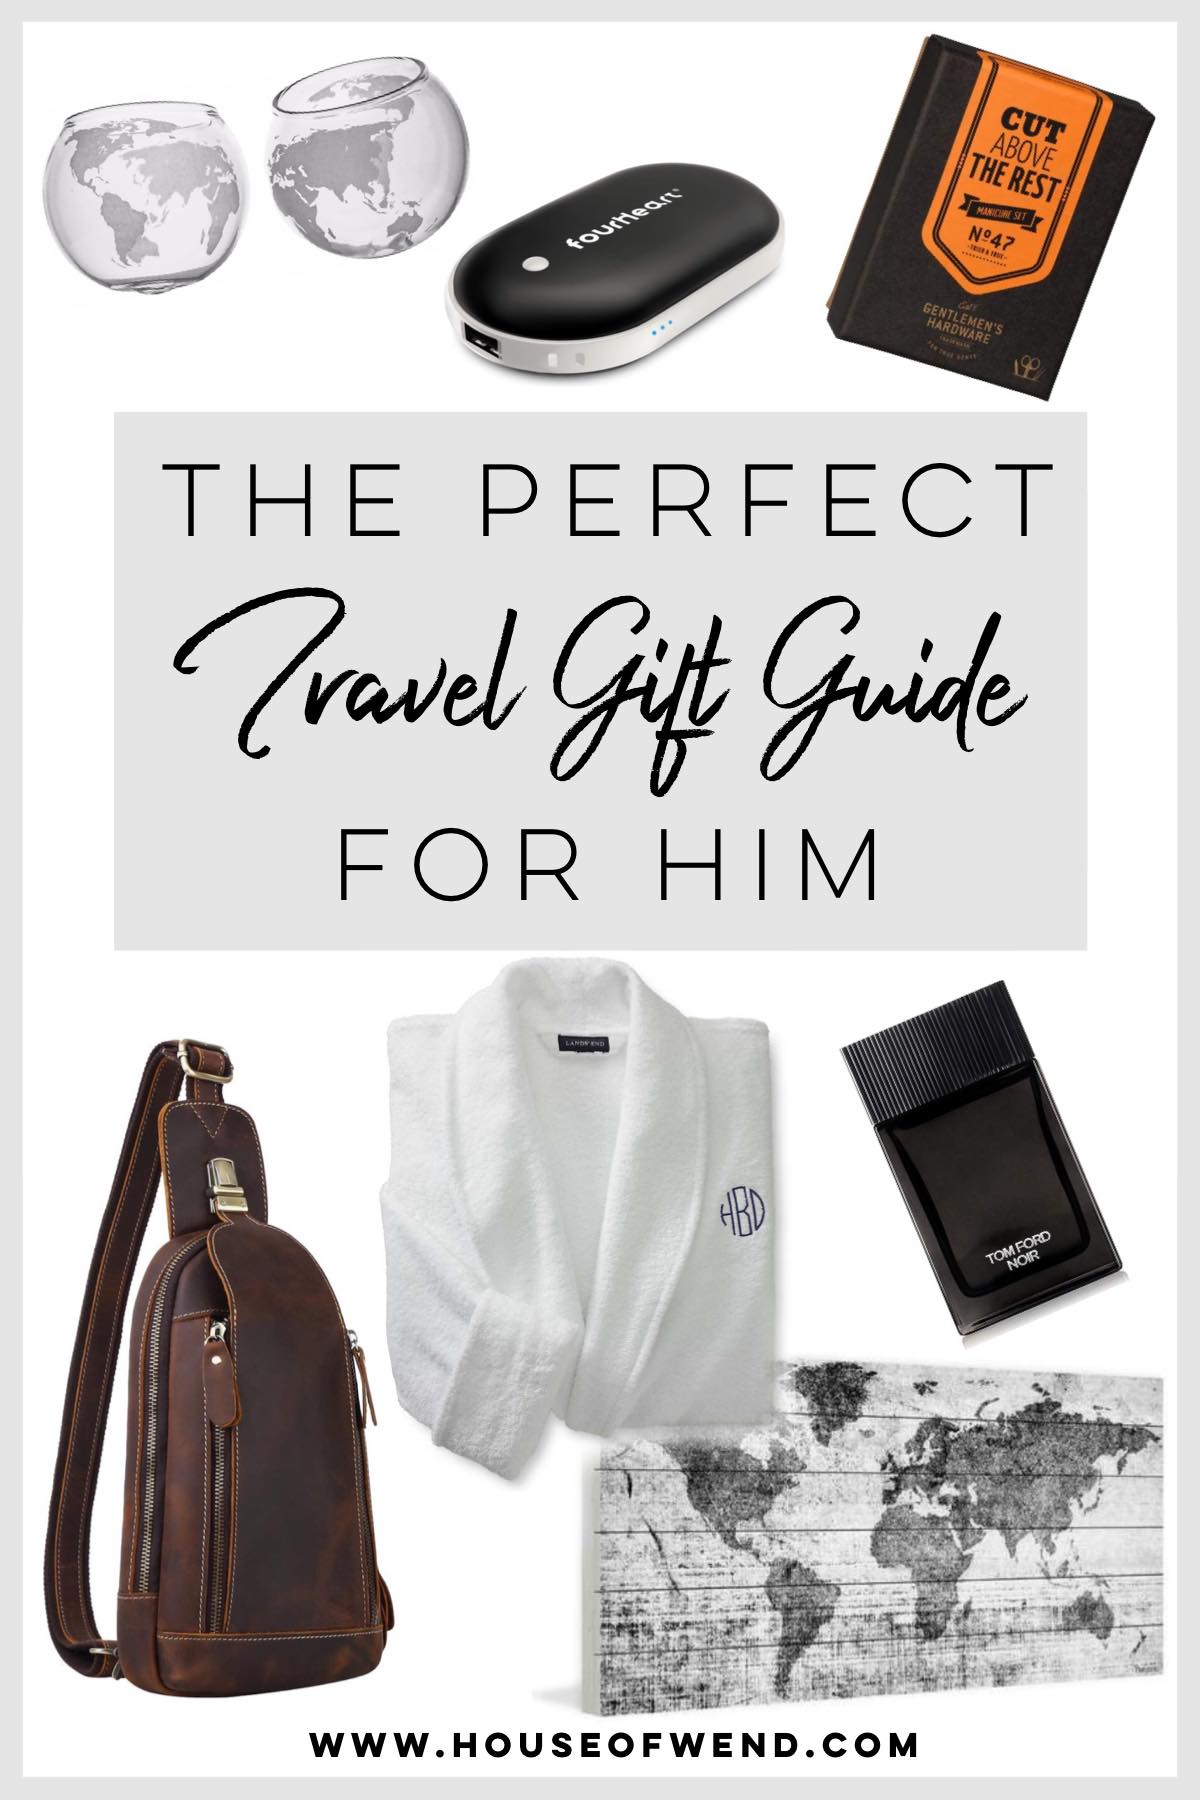 The Perfect Travel Gift Guide for Him